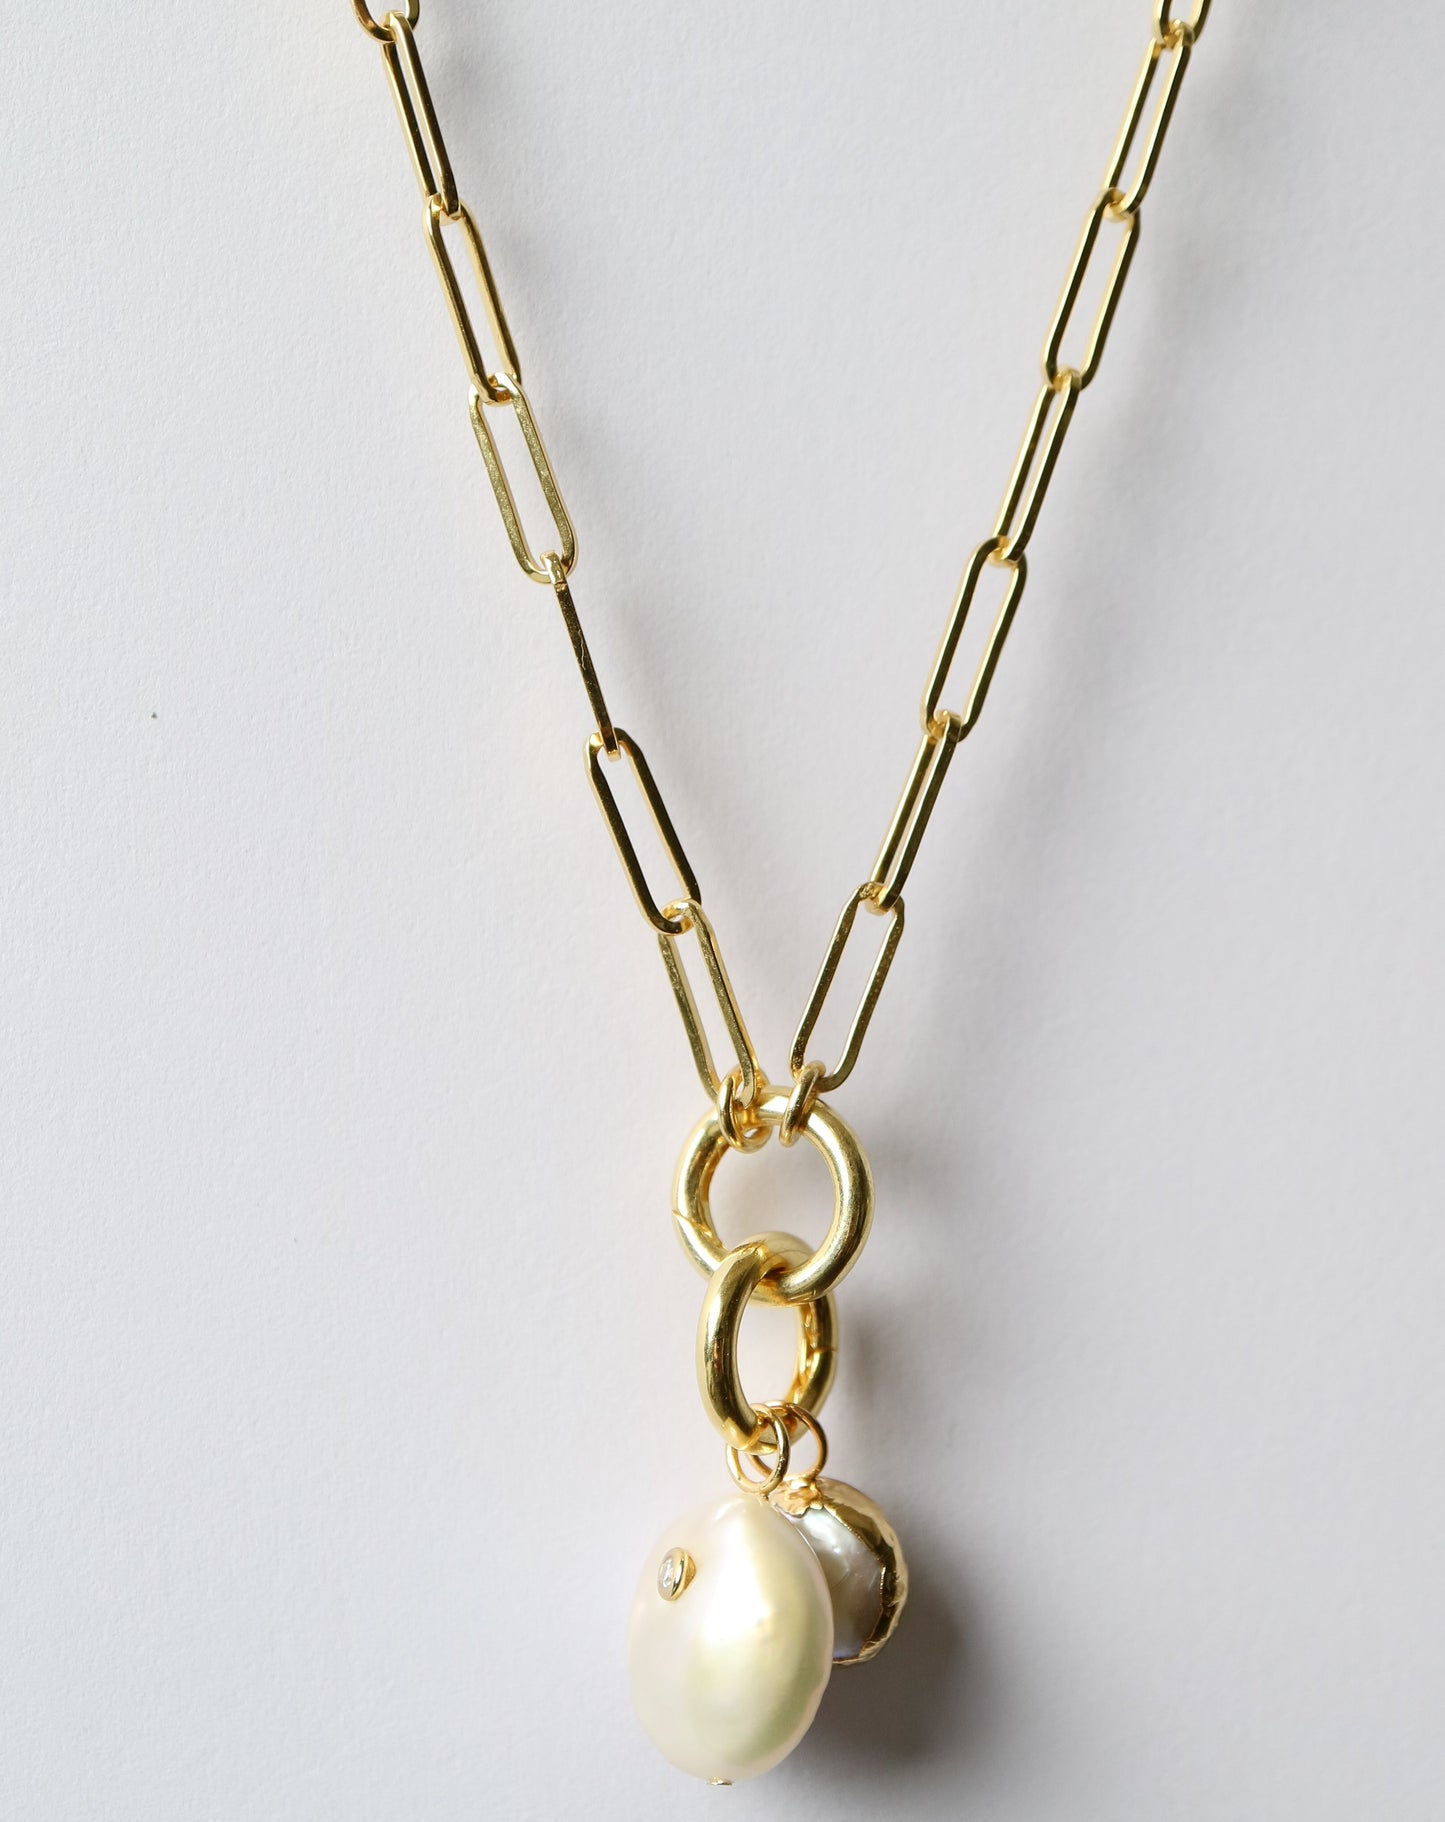 Gold Paperclip Necklace with charms